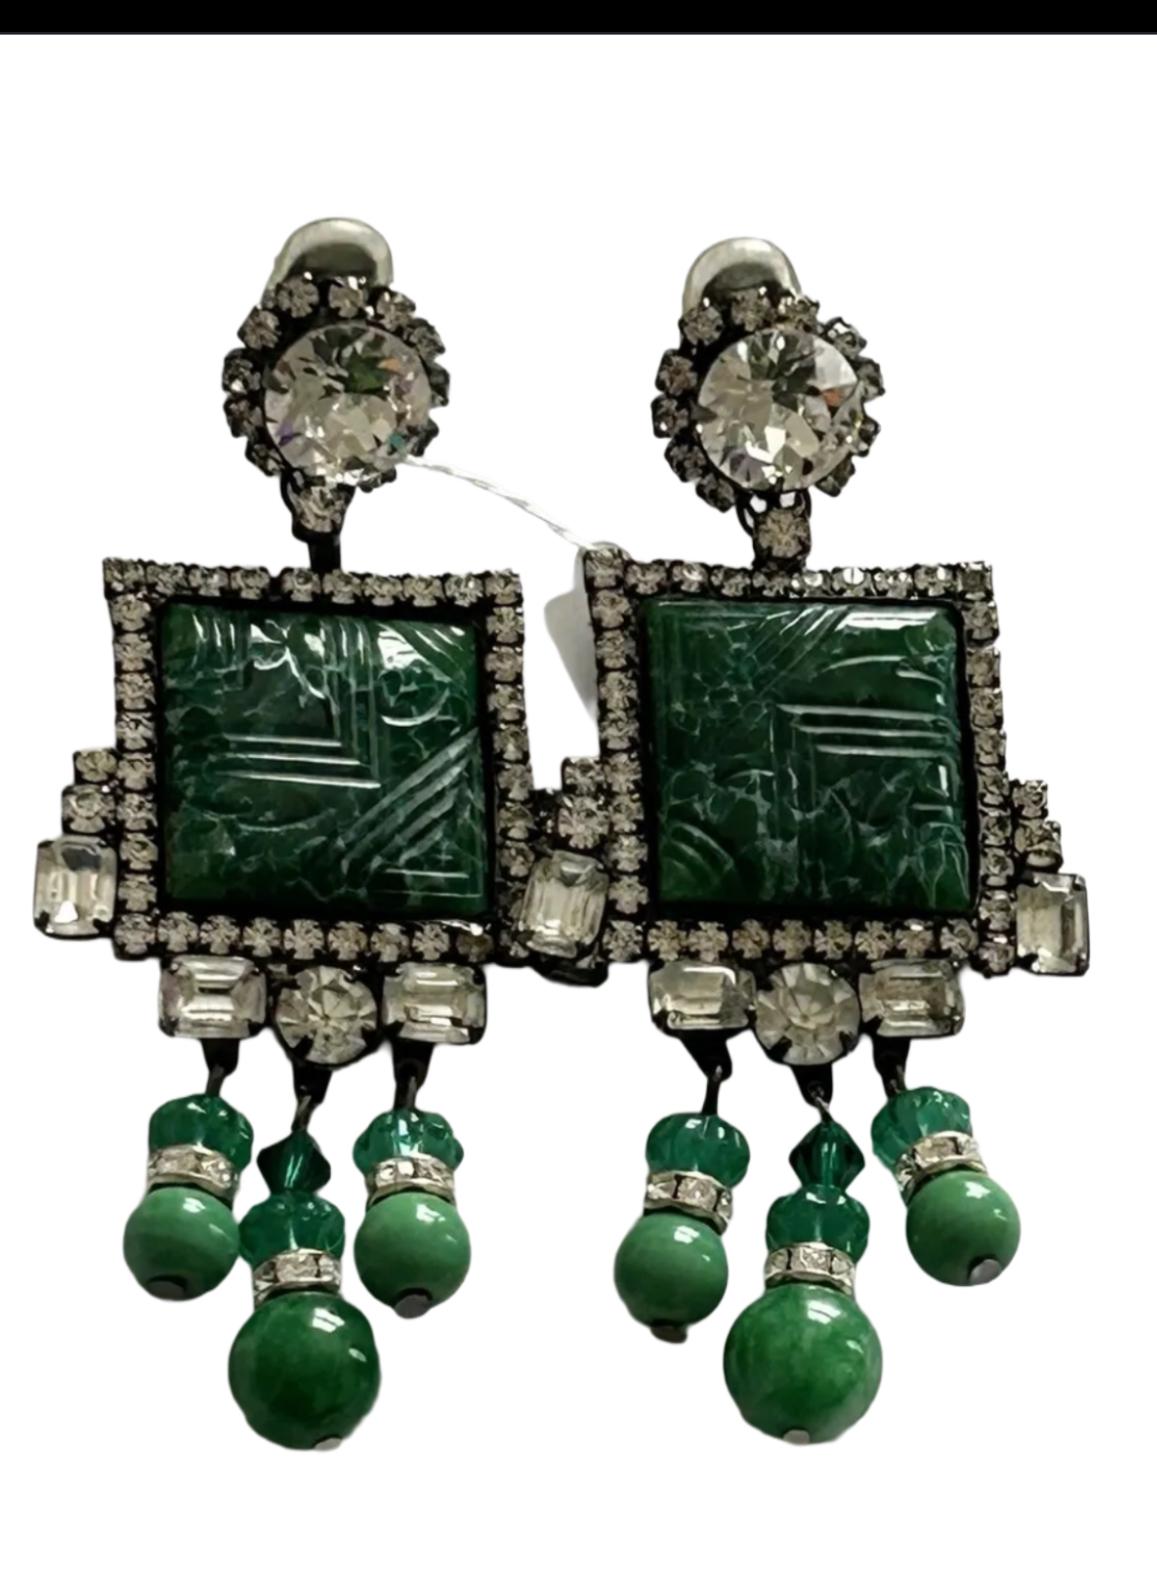 These gorgeous green couture earrings are signed by Moans. These are true runway pieces .

They are beautiful earrings and such a statement!.

These earrings were featured in vogue worn by model on front cover . The ones model is wearing are just a